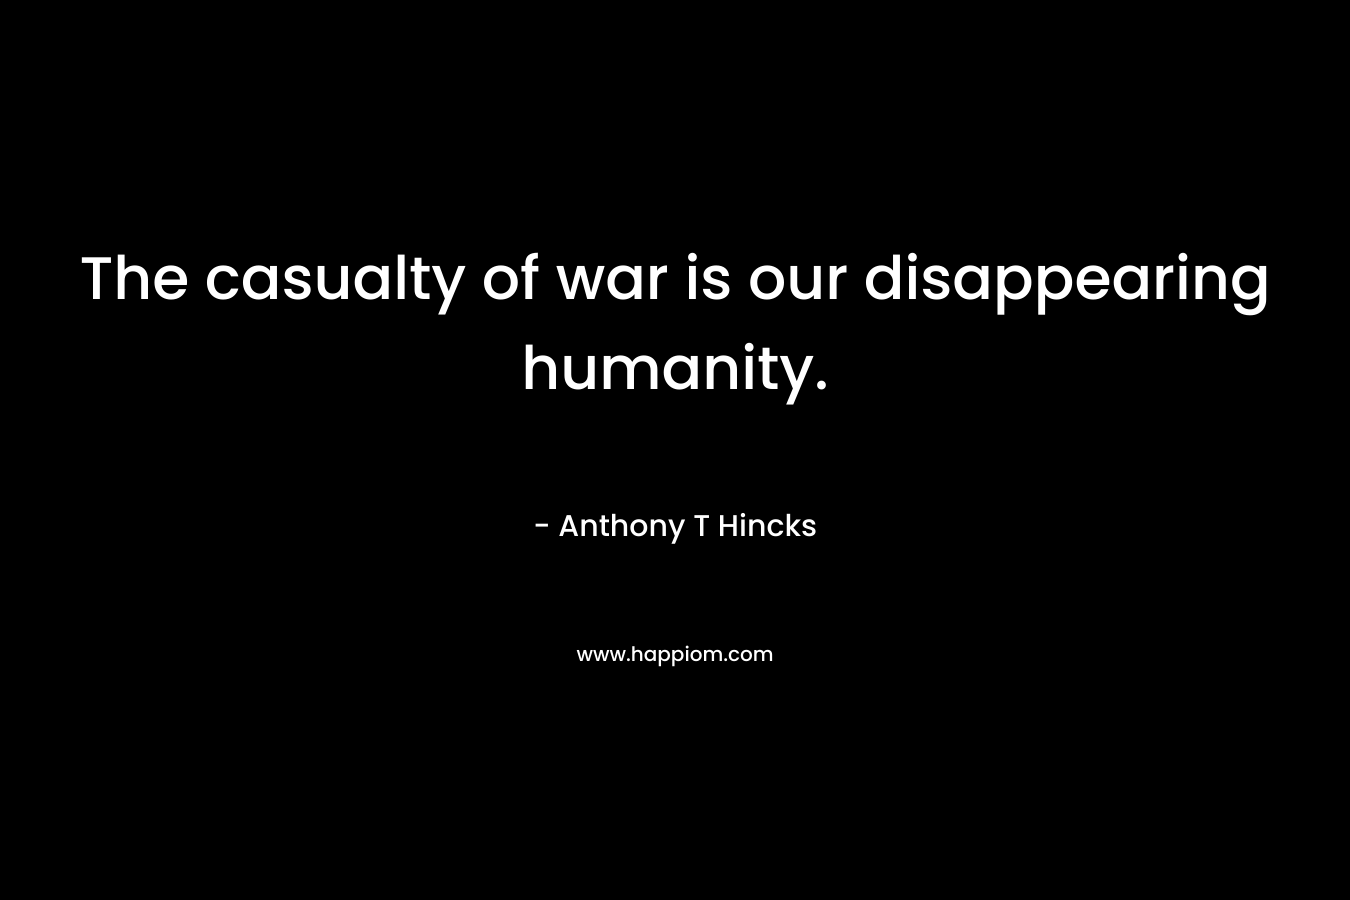 The casualty of war is our disappearing humanity.